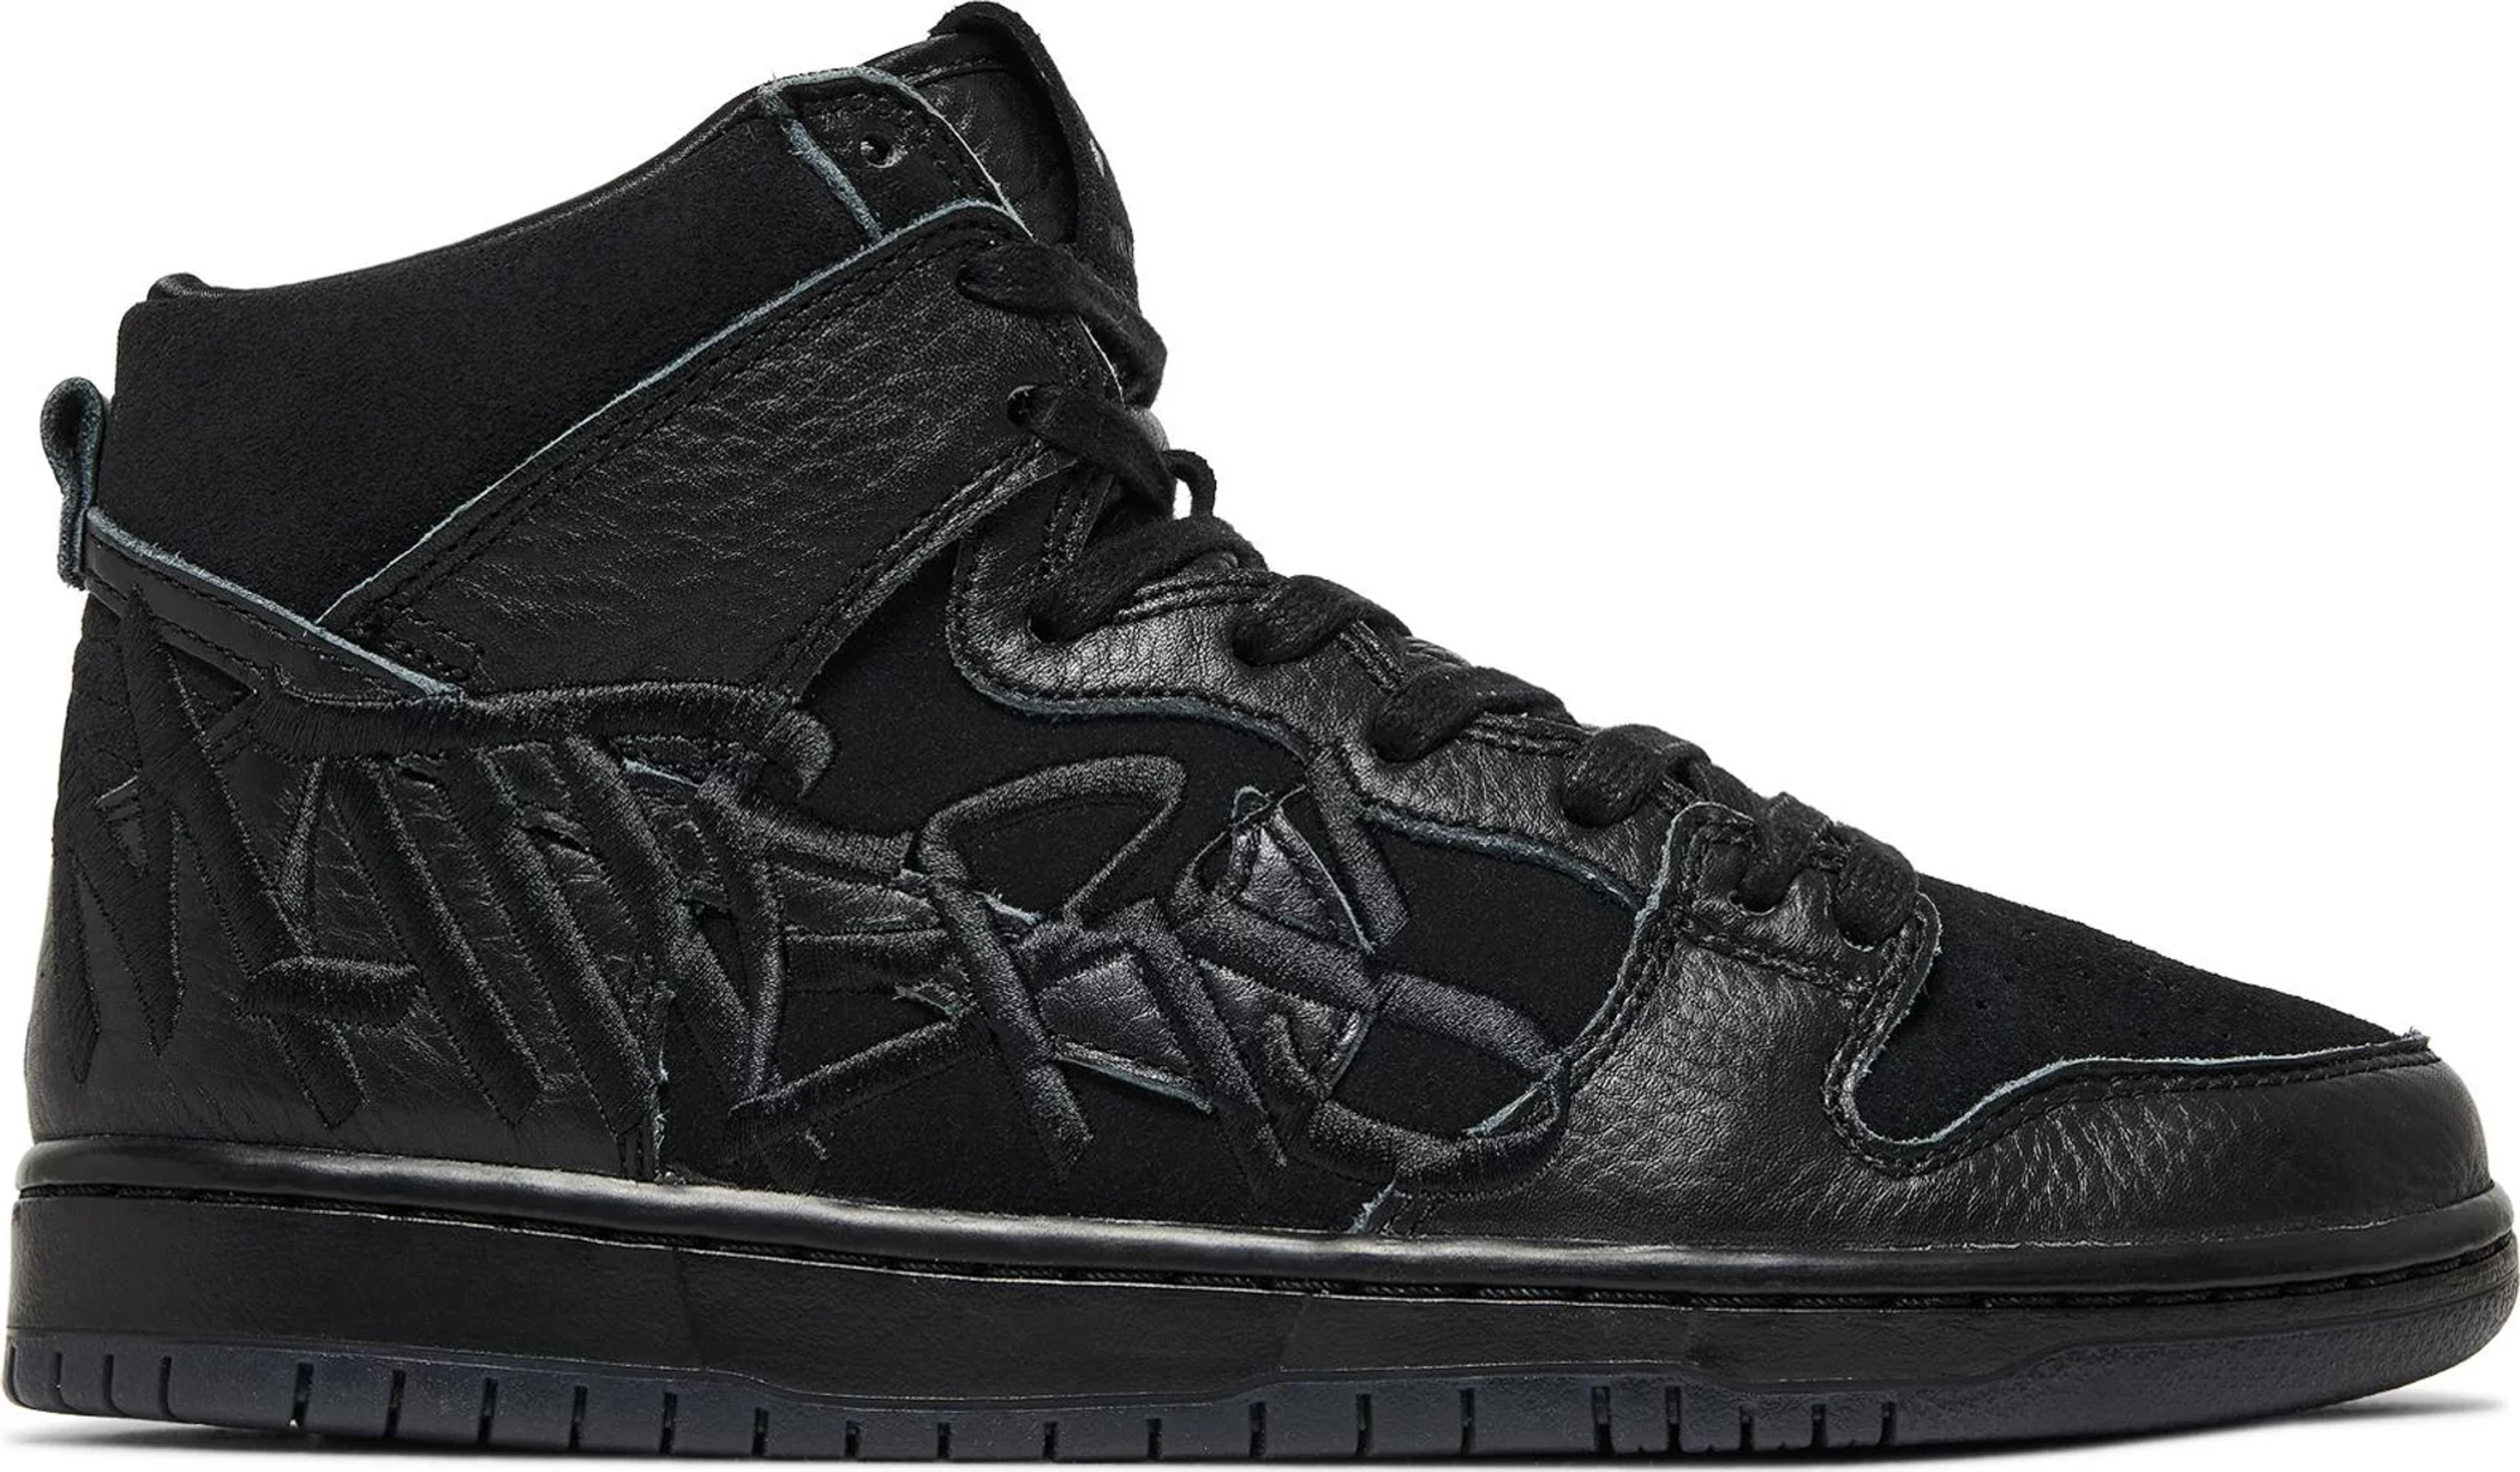 FAUST x Dunk High SB 'The Devil is in The Details' | GOAT